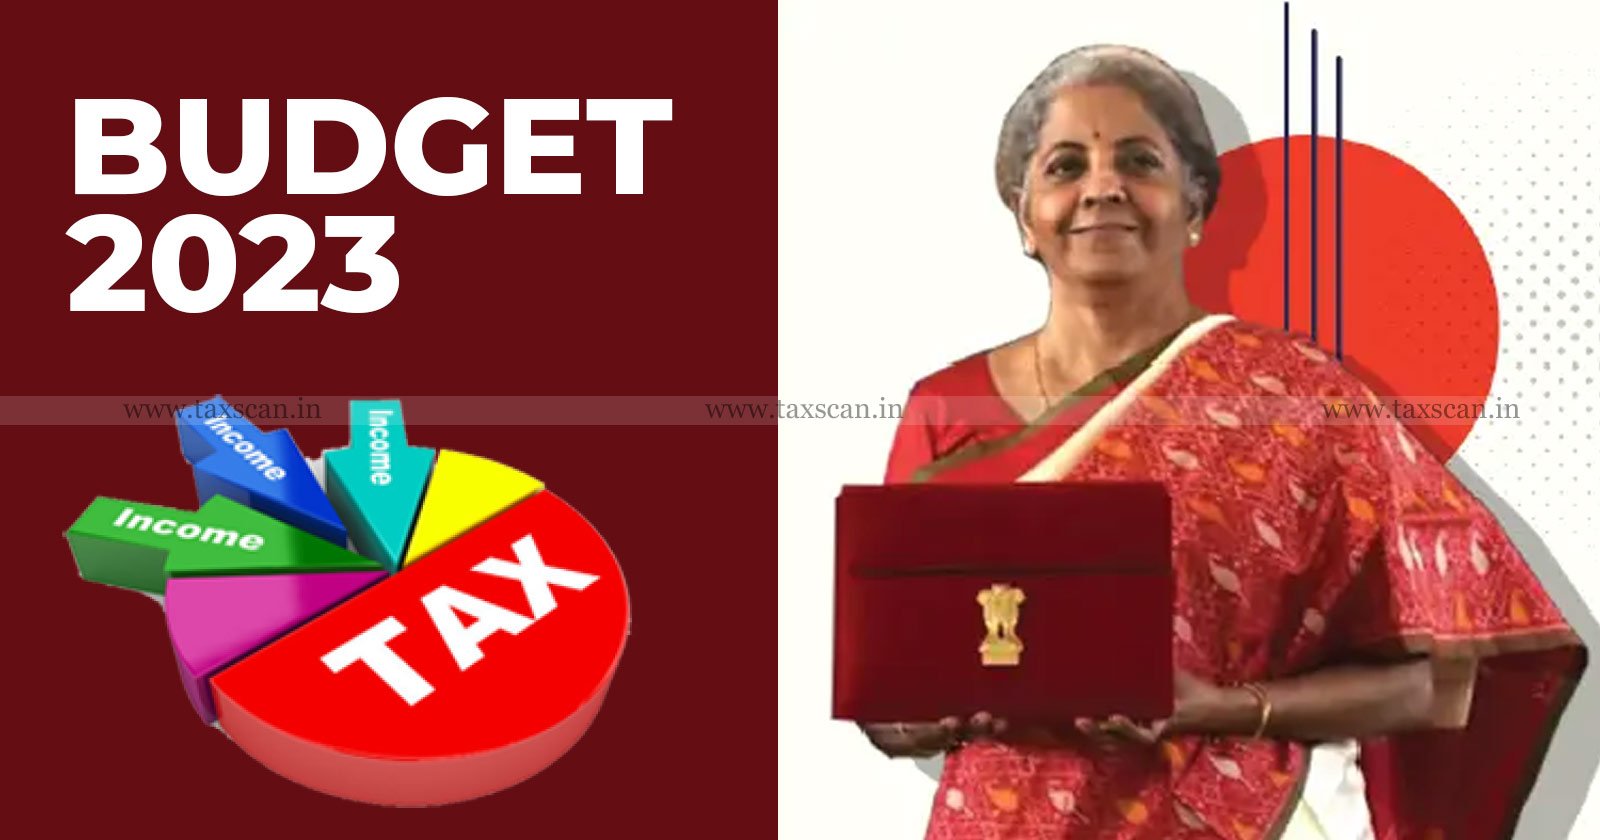 Budget 2023 - Budget - Income Tax Regimes - Income Tax - Tax - Expected Changes - Changes - Union Budget - taxscan